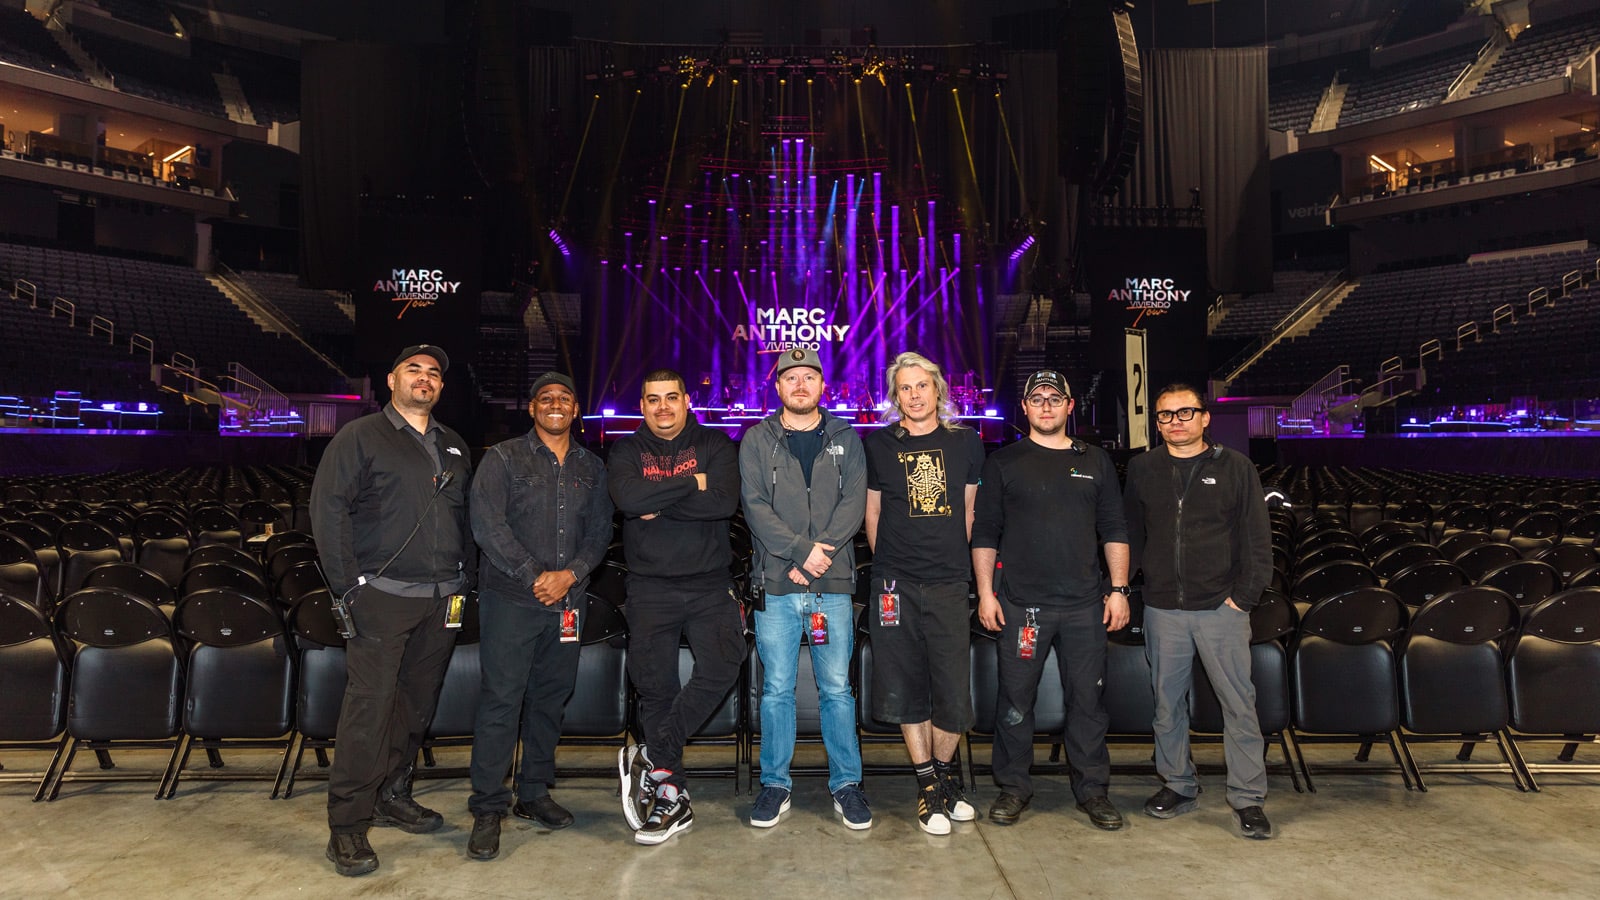 (L-R): Andres Albornoz, Marc Anthony Production Manager; Jose A. Rivera Jr., Marc Anthony FOH engineer; Jimmy Ibañez, Marc Anthony Monitor Engineer; Eric Swanson, UltraSound Assistant Monitor Engineer; Sean McAdam, UltraSound PA Tech; David Williams, UltraSound Systems Tech; Jorge Solorzano, Marc Anthony Stage Manager/Audio Tech